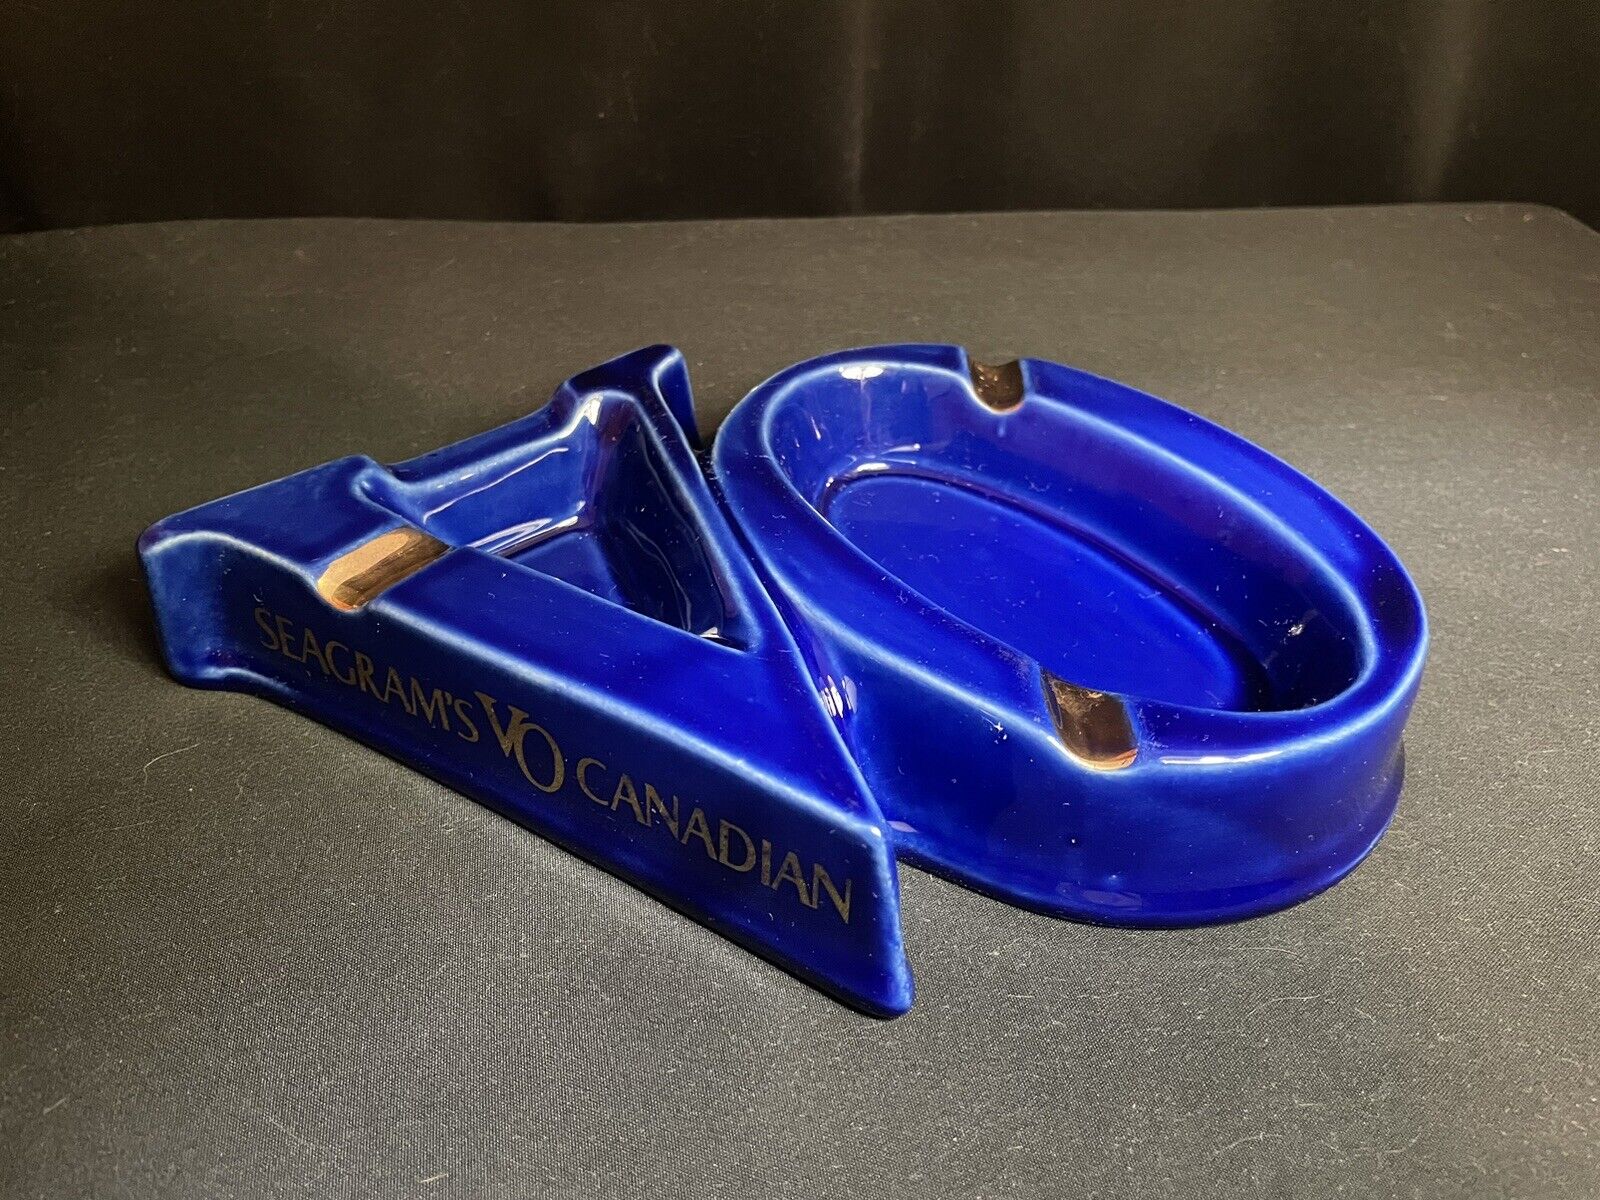 Seagram’s VO Canadian Whiskey Cobalt Blue & Gold Ash Tray